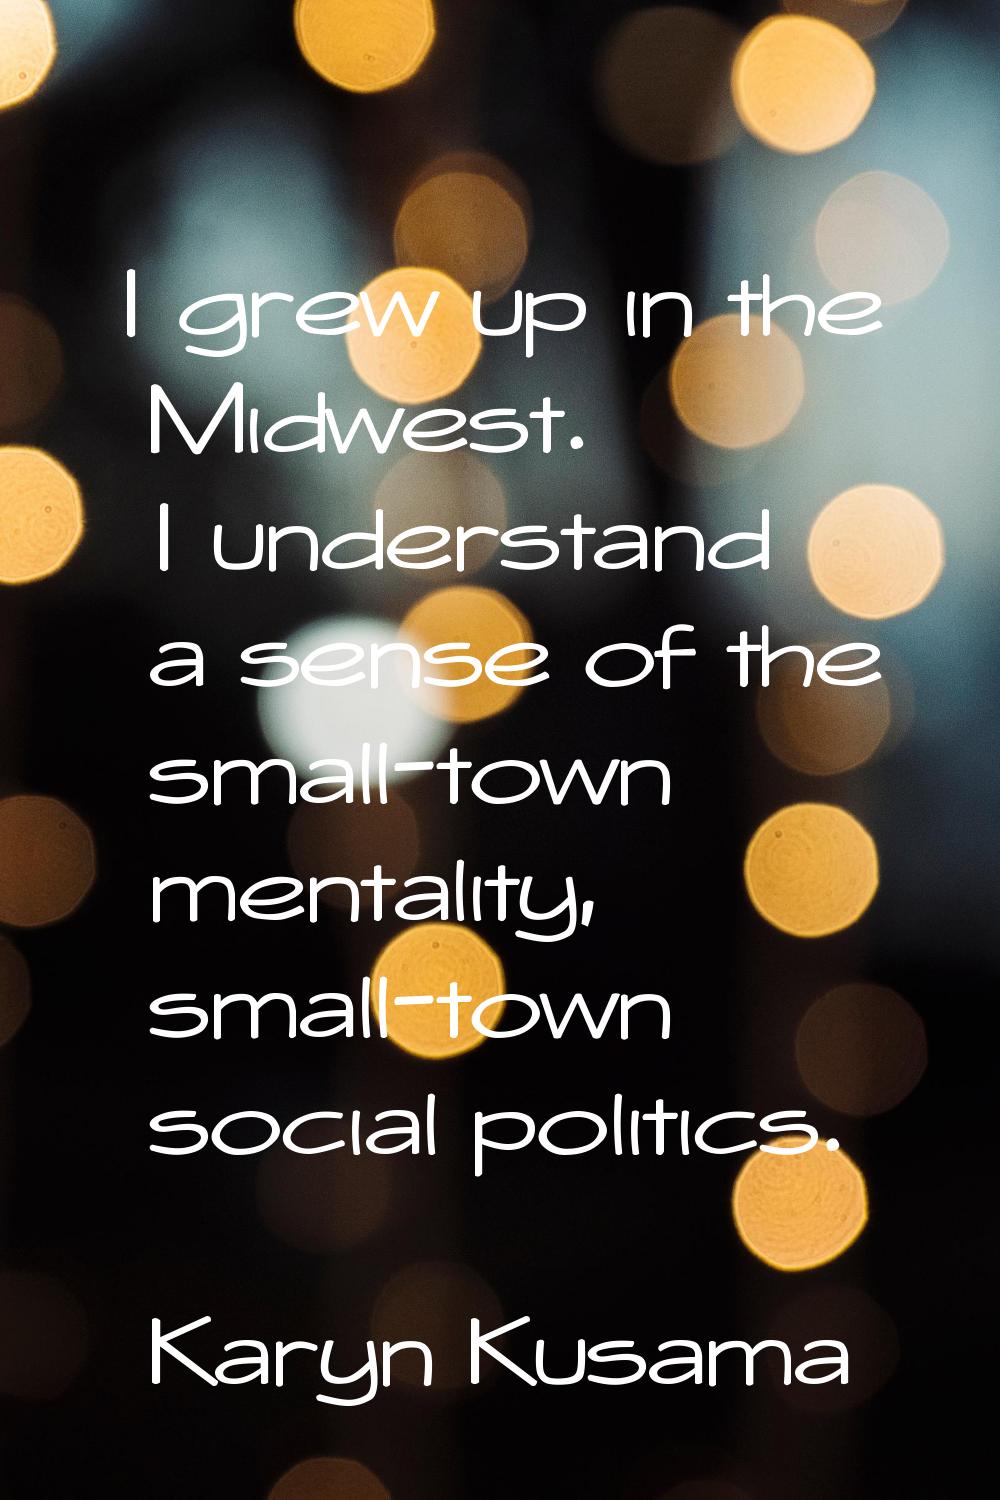 I grew up in the Midwest. I understand a sense of the small-town mentality, small-town social polit